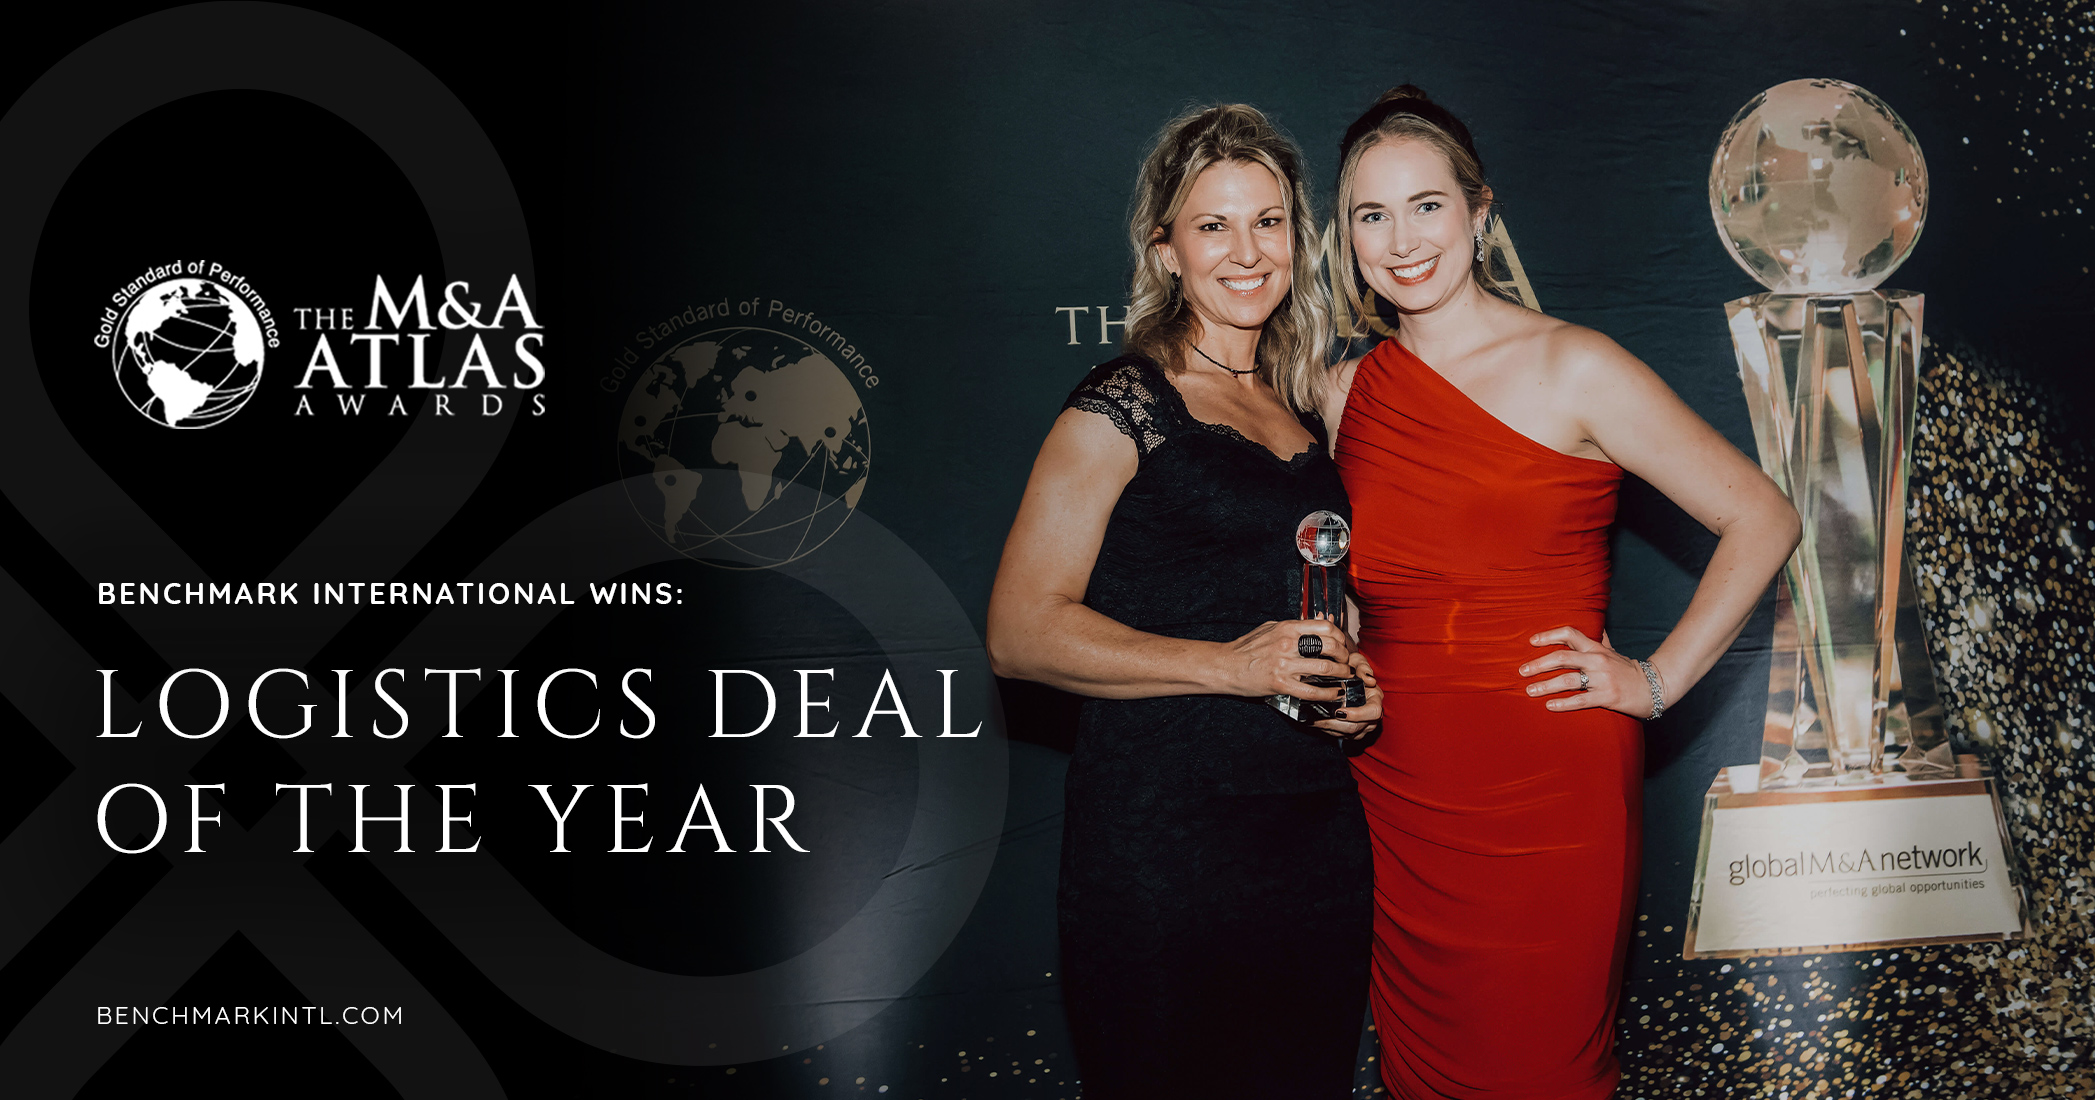 Benchmark International Wins Logistics Deal Of The Year